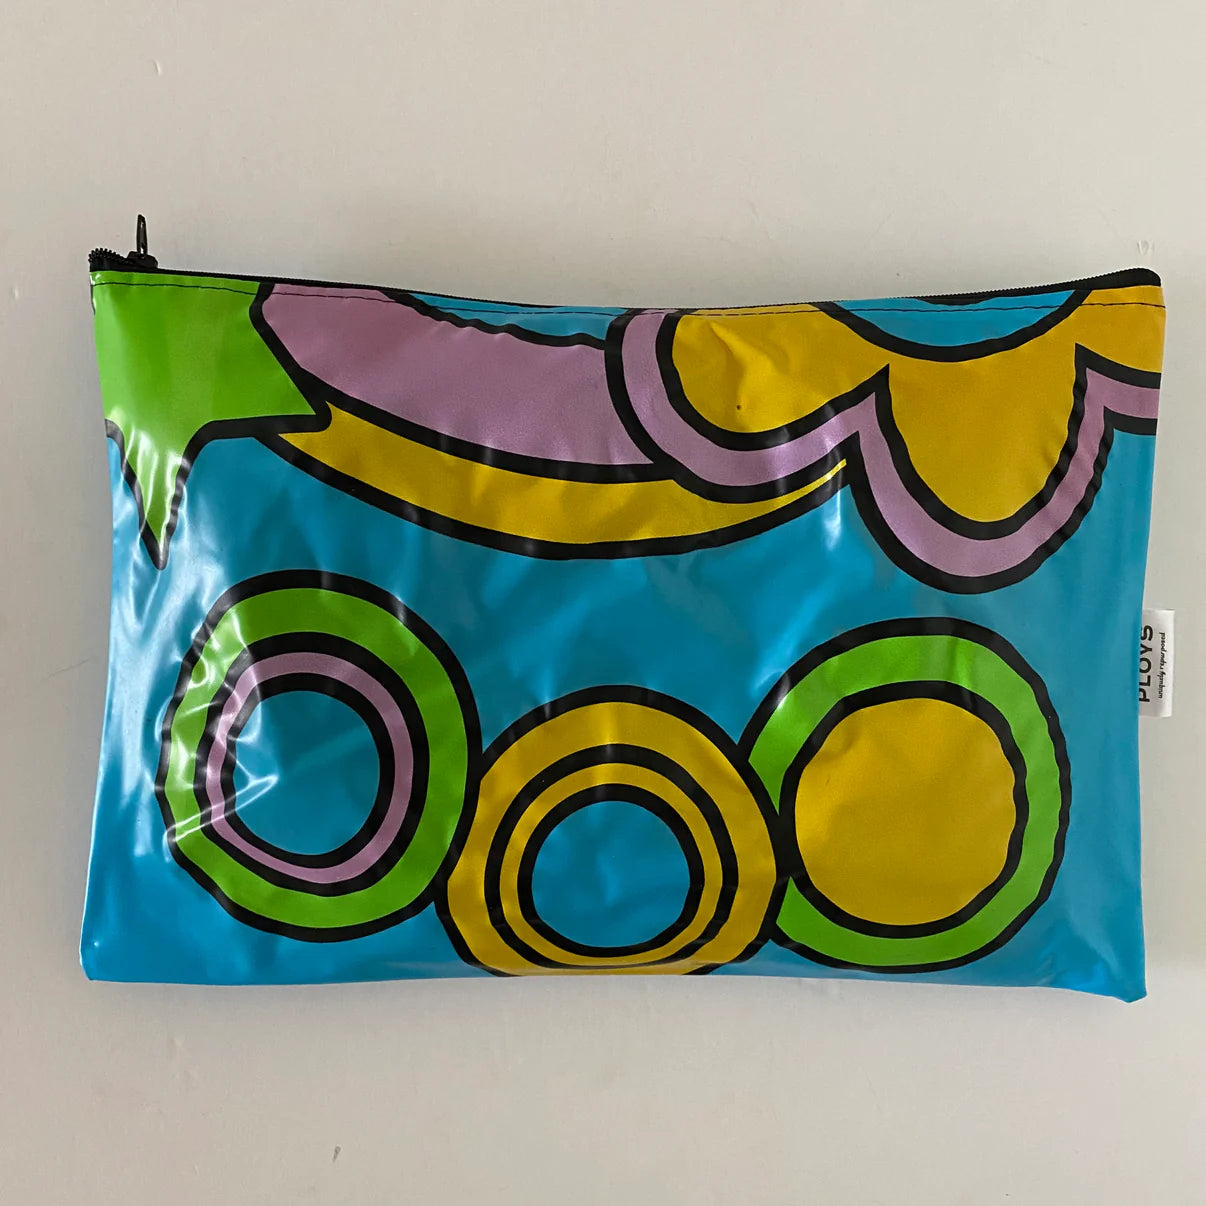 Recycled Maxi Purses, Pencilcases, Zippered Pouches or Wet bags